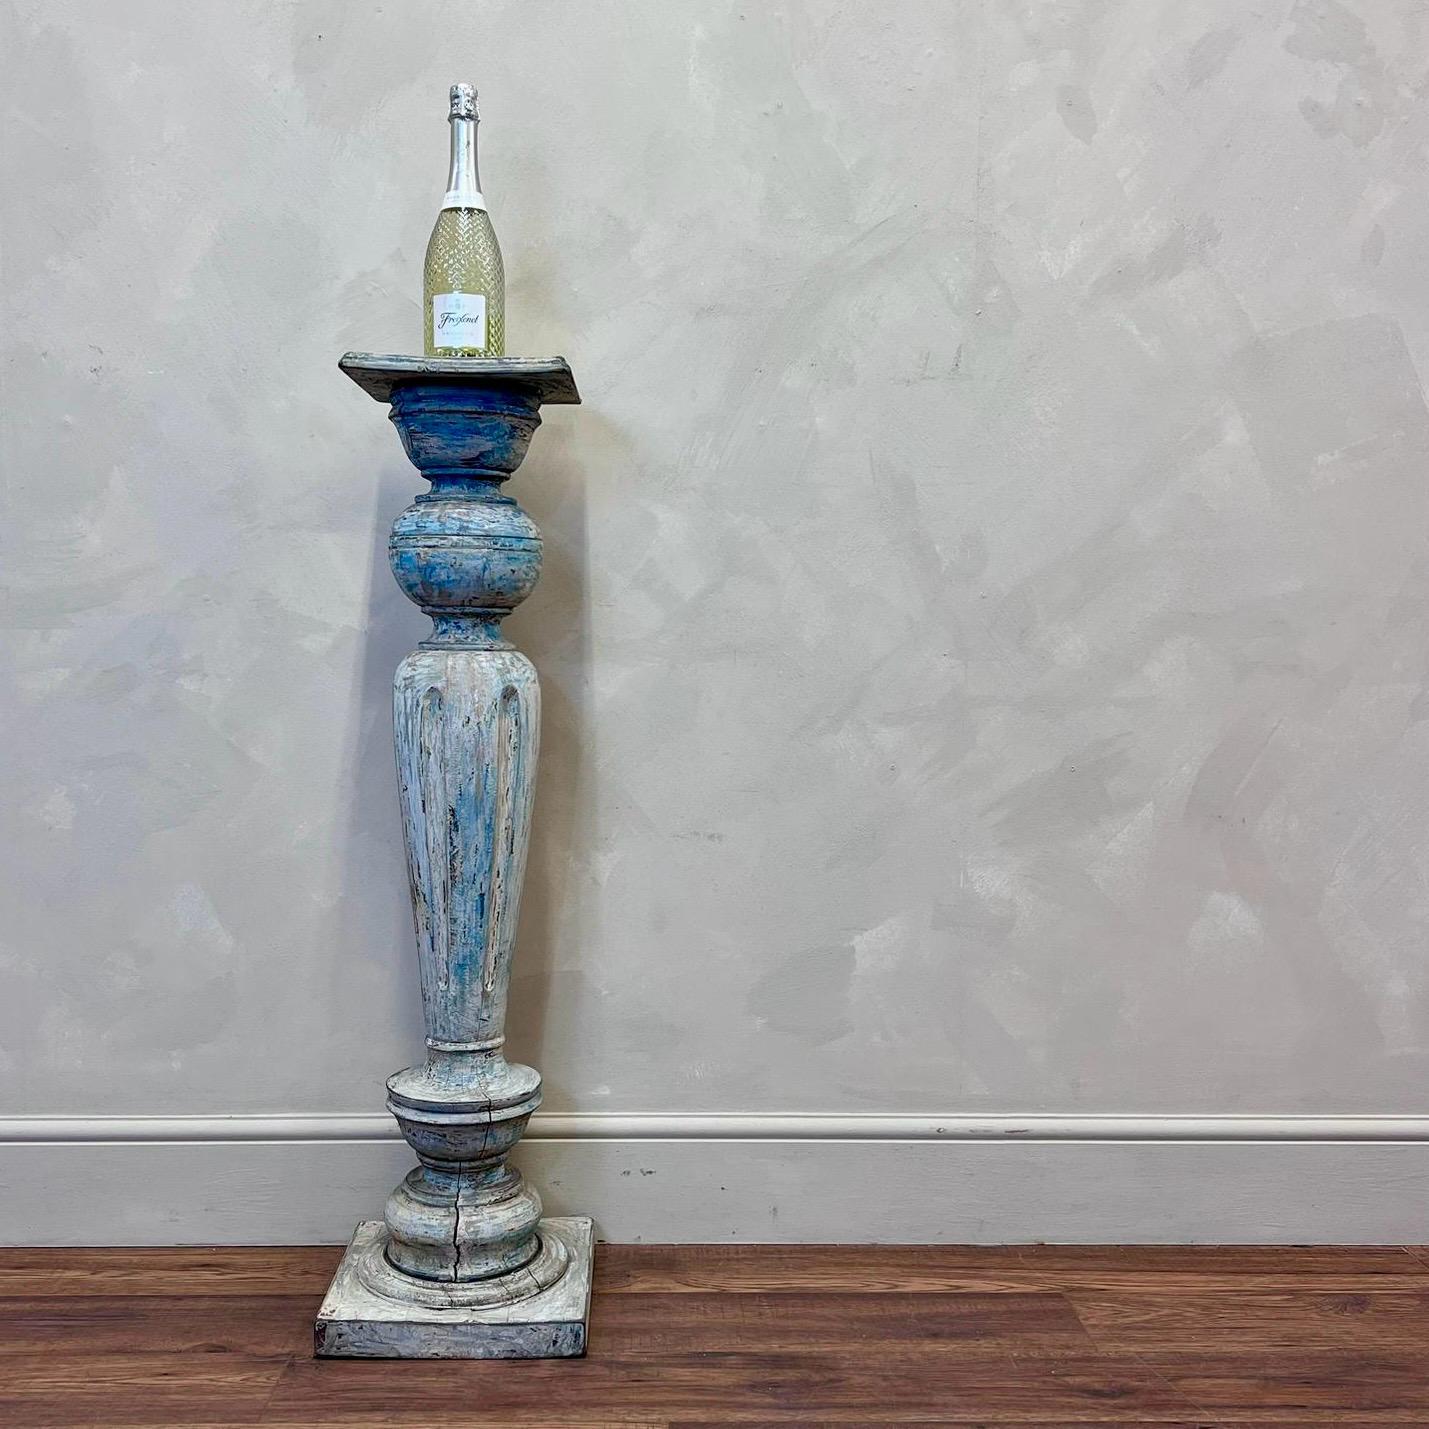 Swedish painted pedestal / column, with dry scraped, original paint.
Nice interiors piece that can be used to display a bust or lamp or just use as a sculptural item 

Height - 110 cm
Base - 30 cm x 31 cm
Top - 24.5 cm x 25.5 cm
Please message if